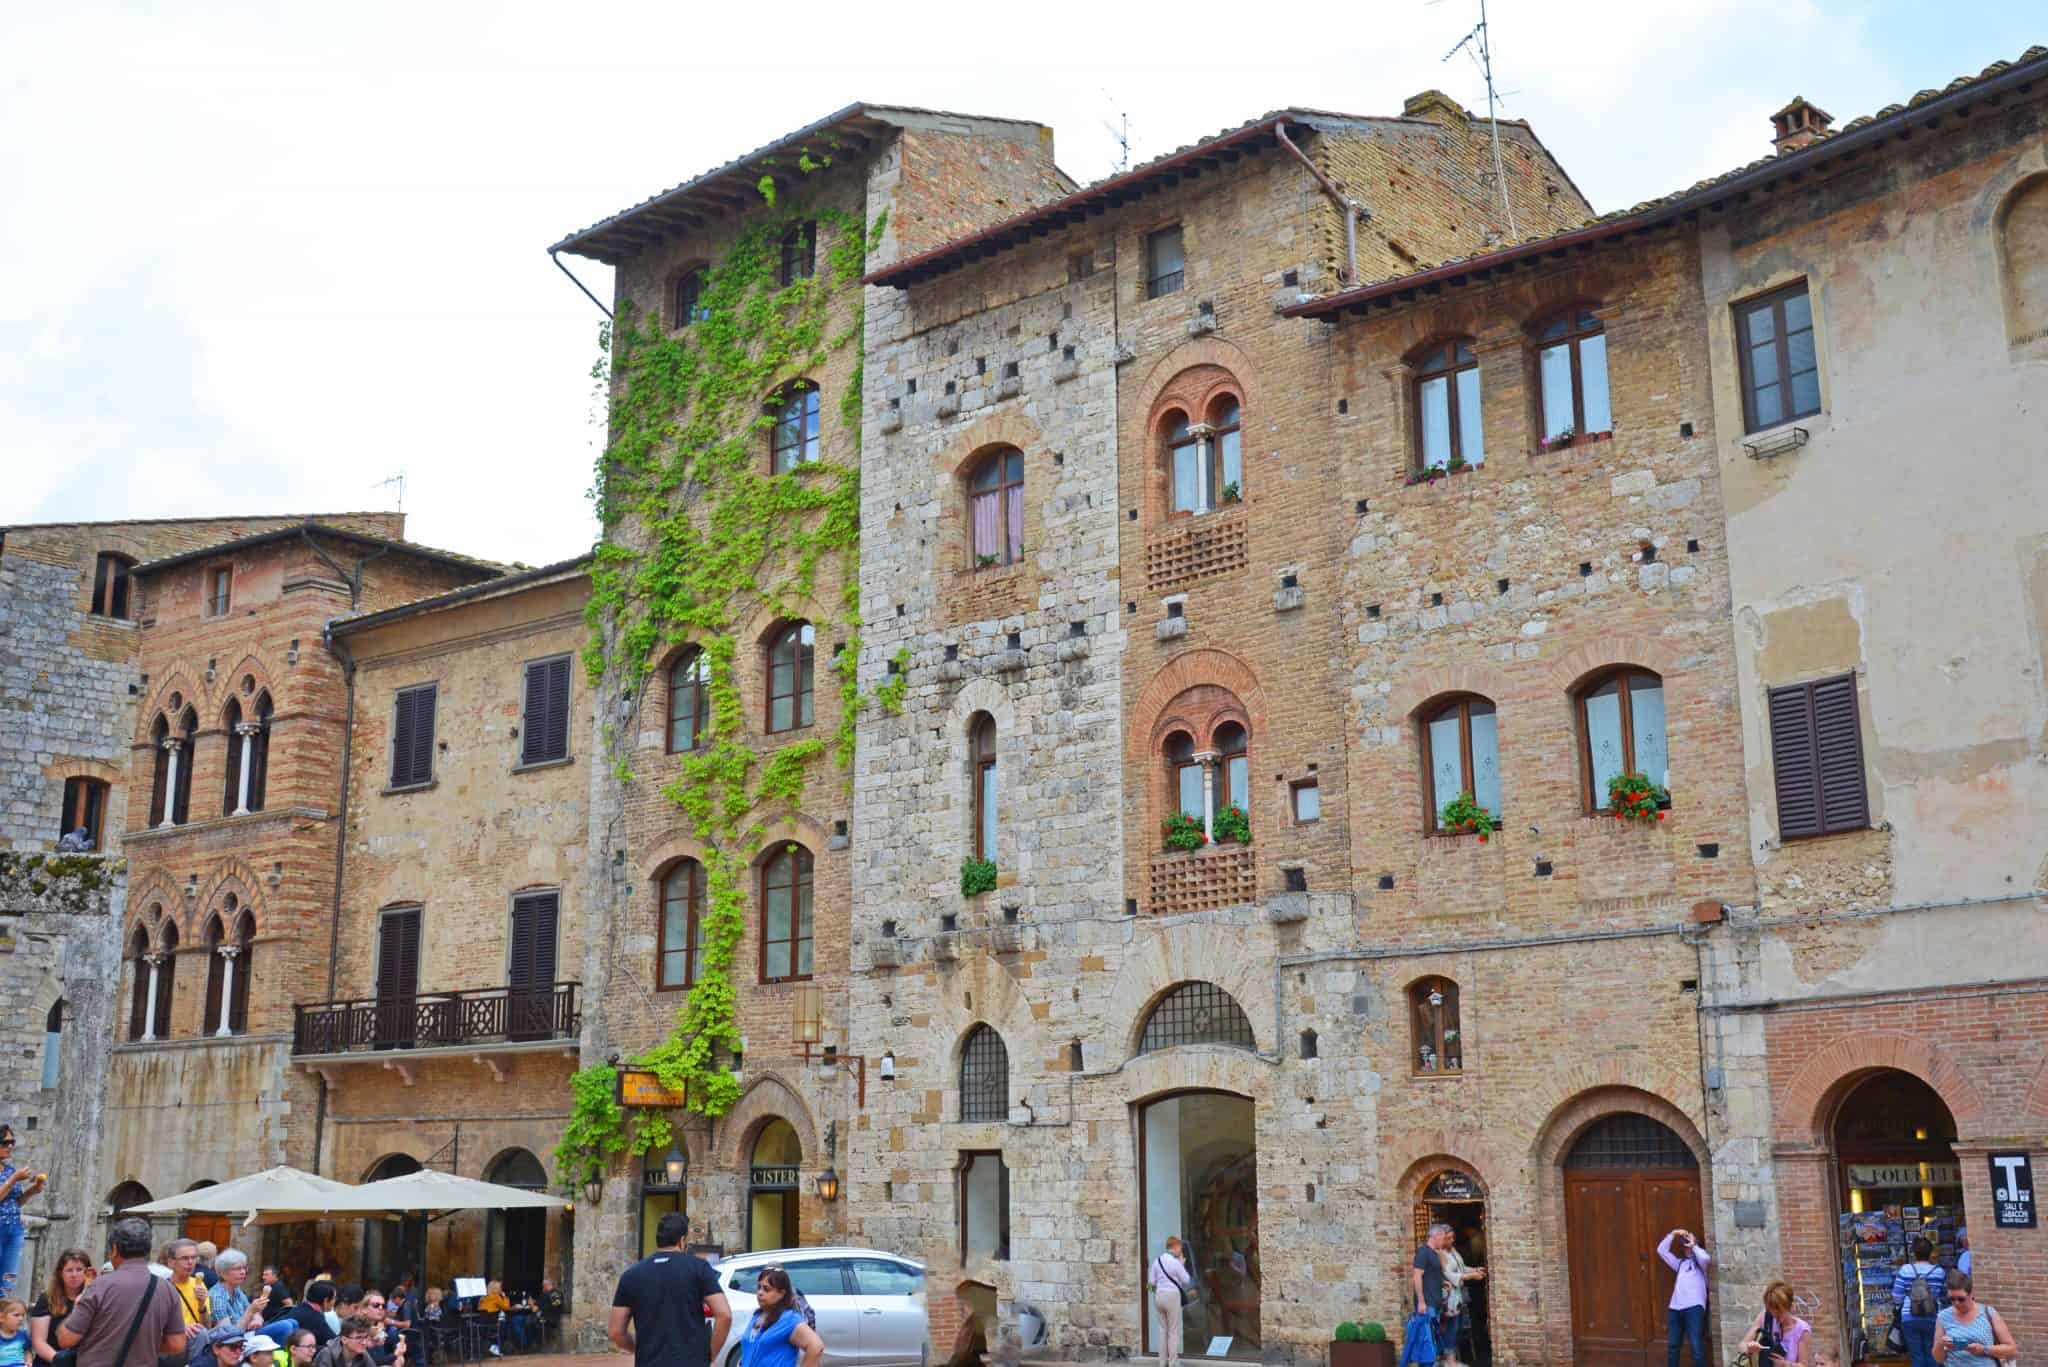 San Gimignano, a medieval town in Tuscany, is perfect for a day trip from Florence or Rome. Intimate with fabulous food, views and gelato, it is the quintessential Italian village. #SanGimignano #tuscany www.savoryexperiments.com